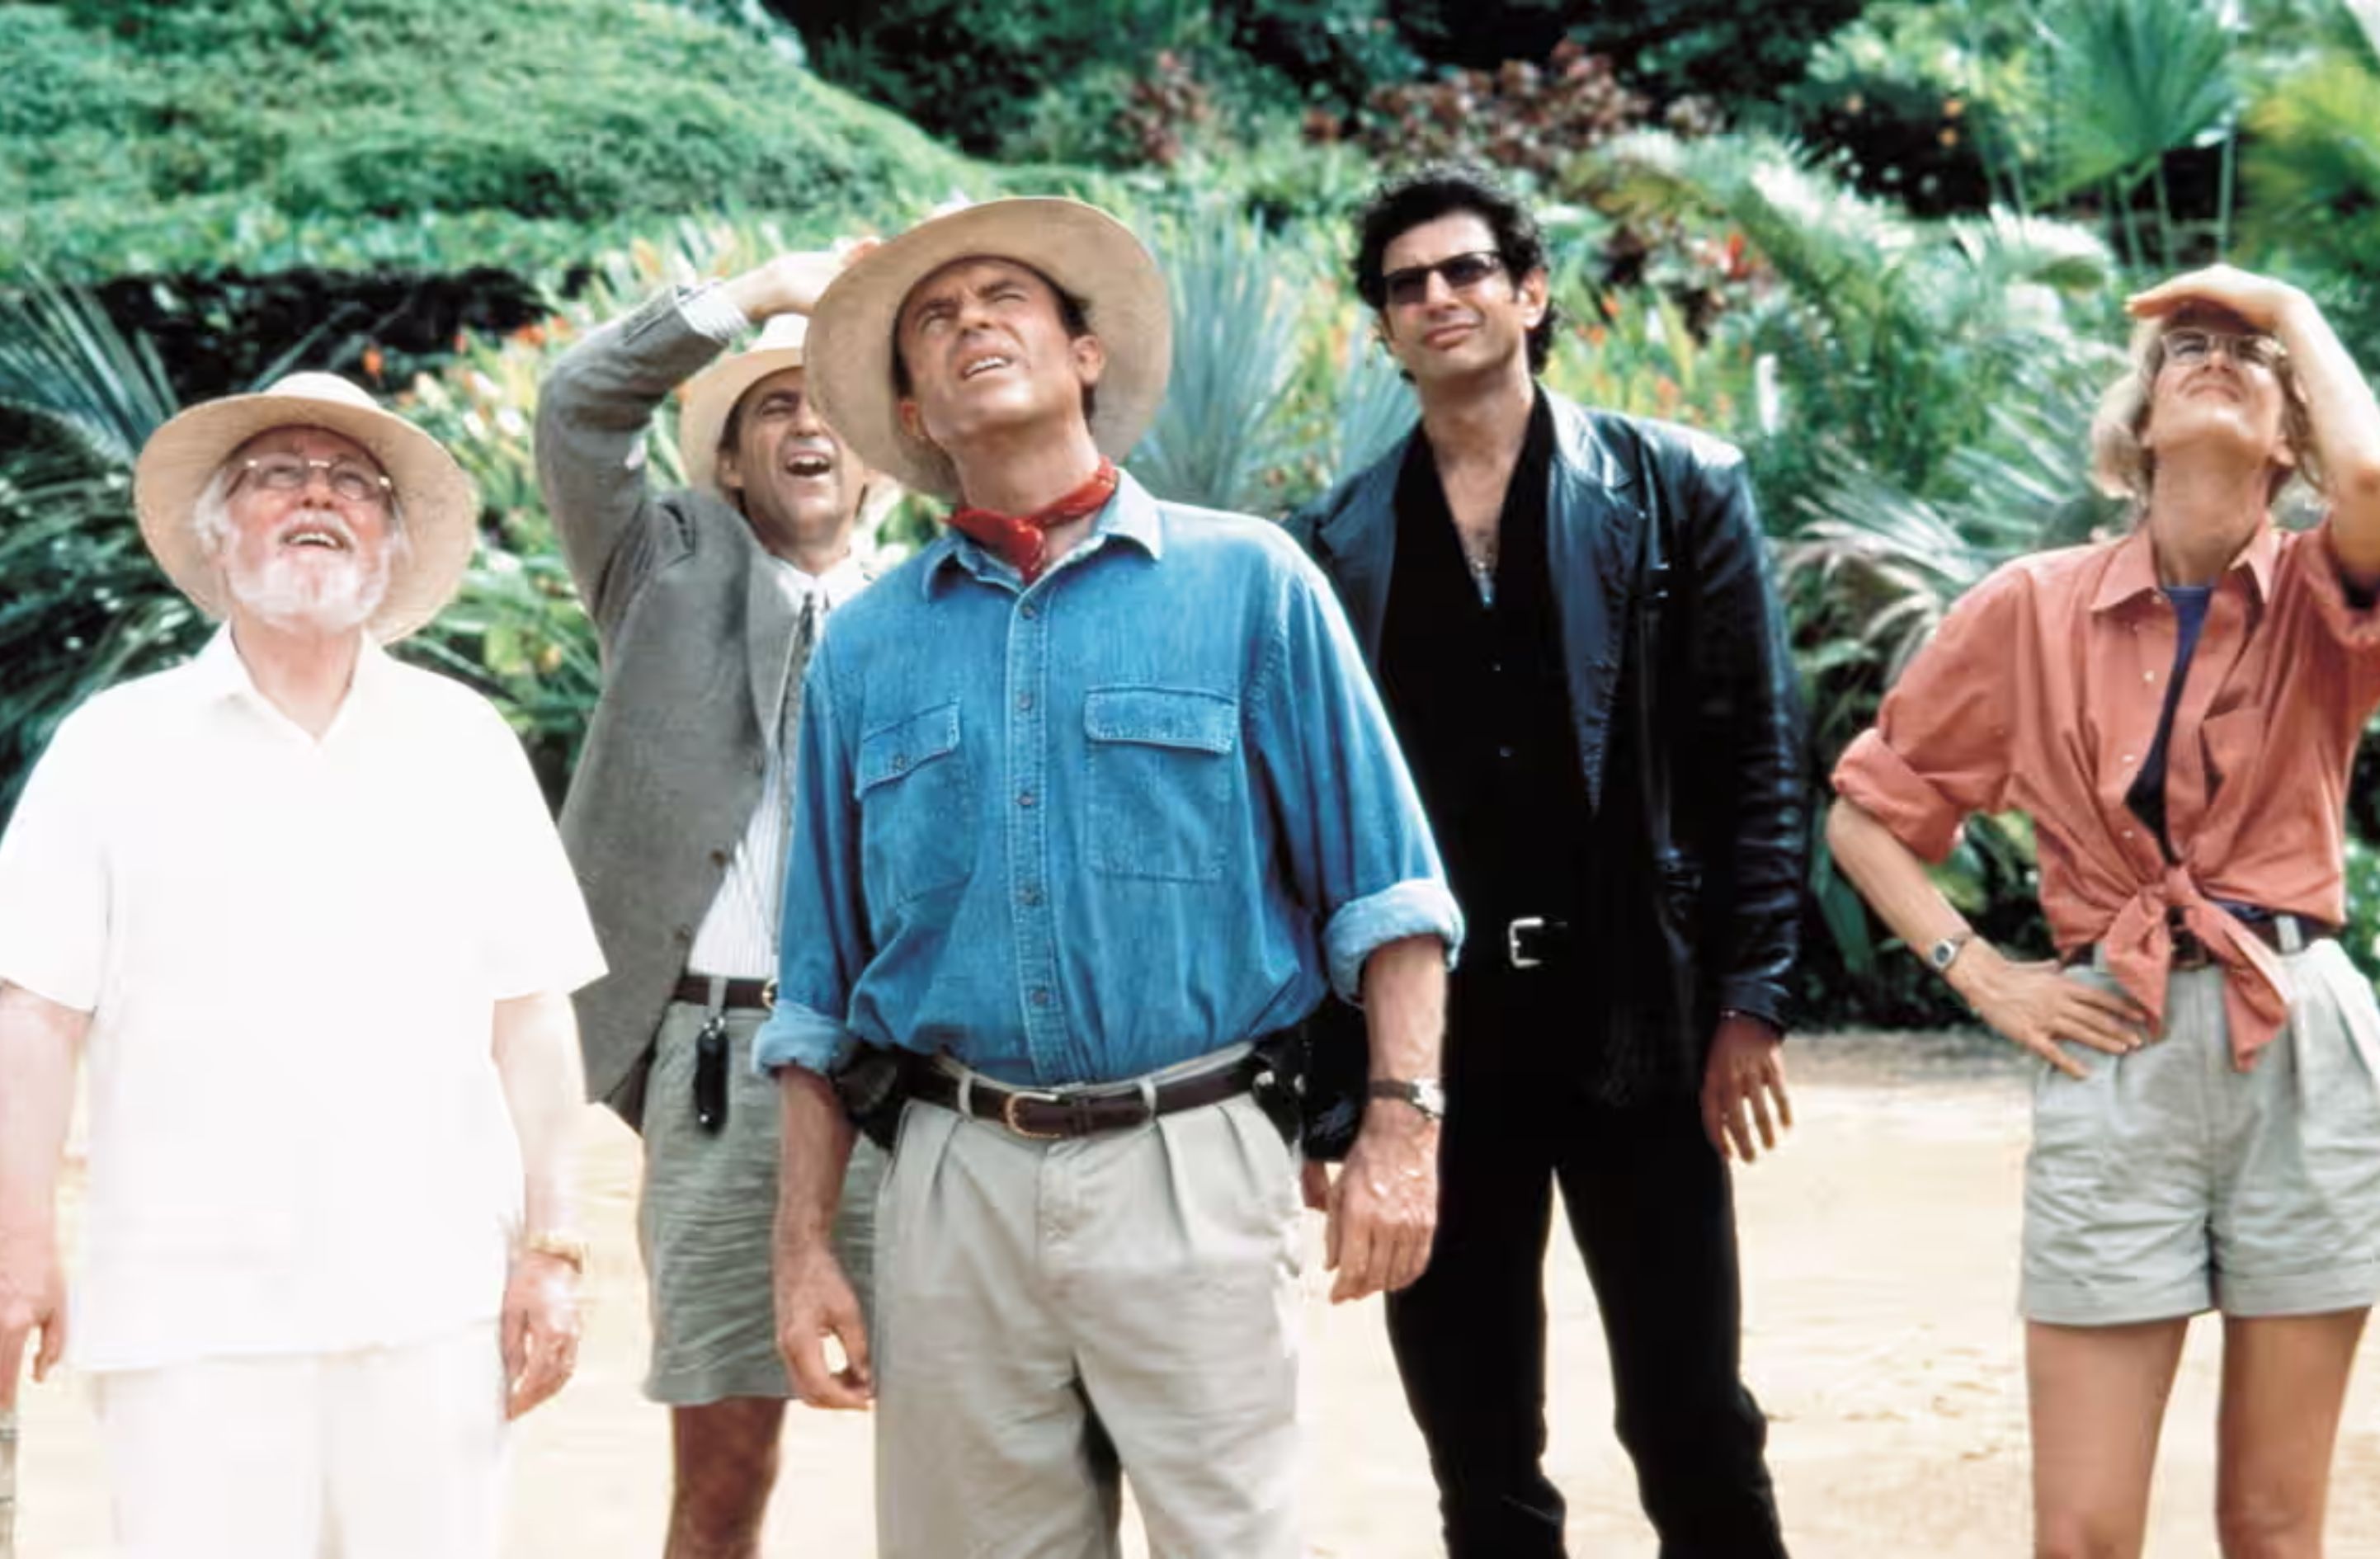 Misconceptions in Media:  How Jurassic Park Shaped Society’s Inaccurate View of Dinosaurs